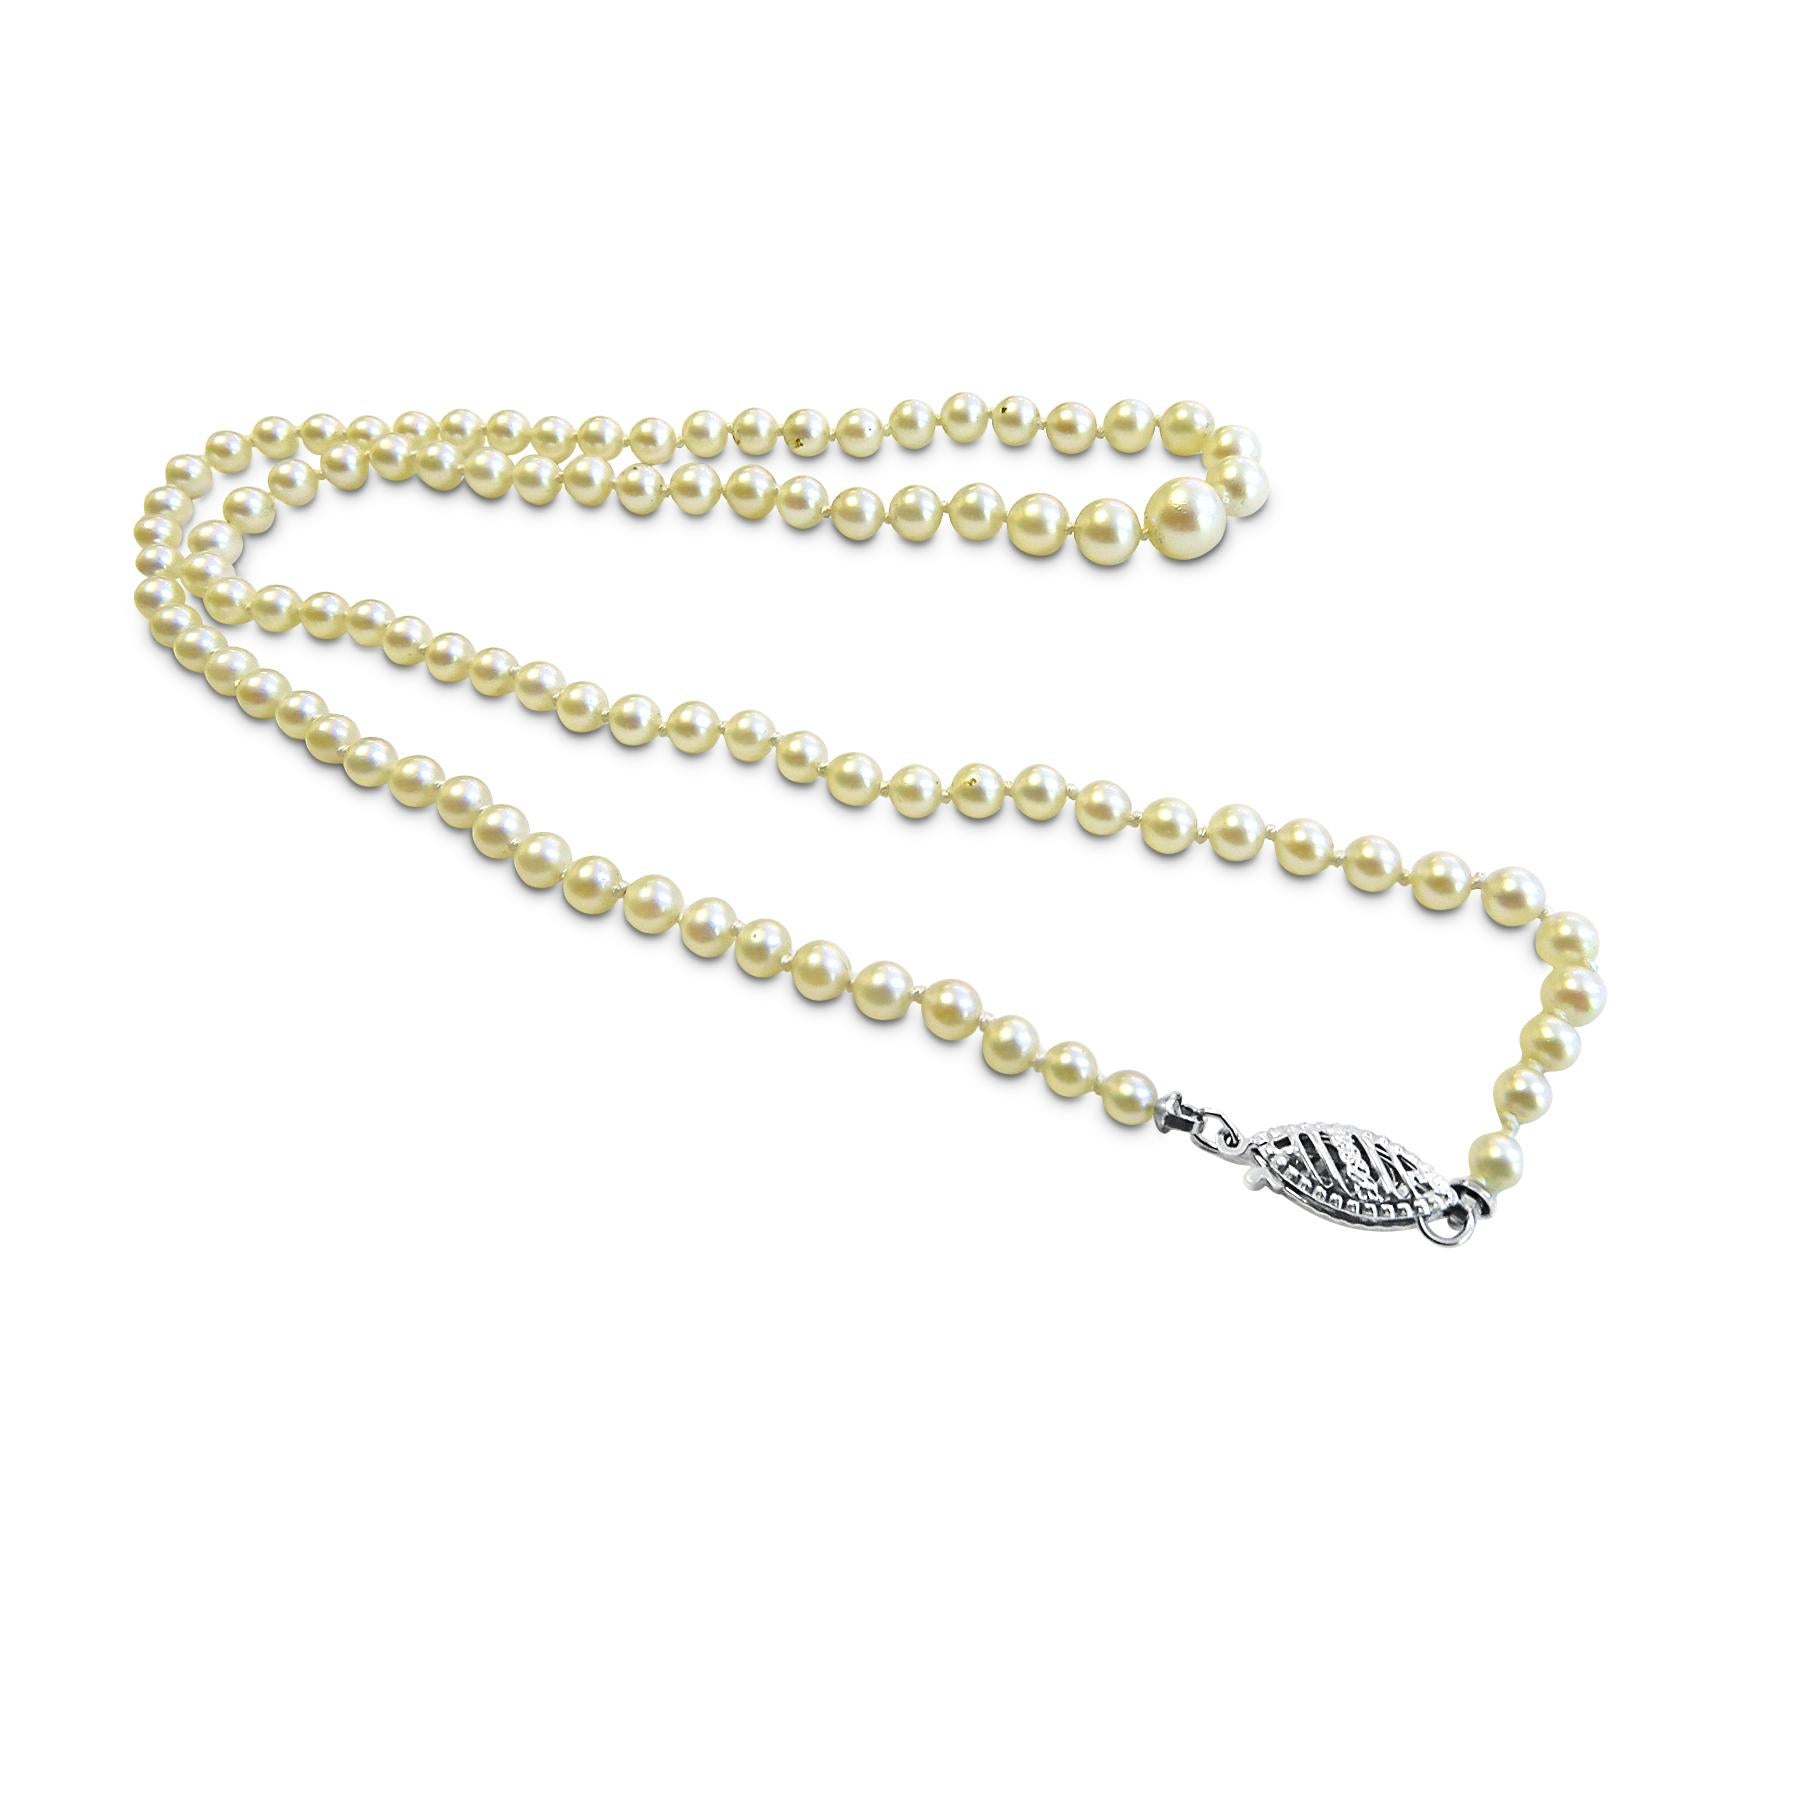 Cultured Pearl Antique Necklace Graduated 14 Karat Lock In Excellent Condition For Sale In Jackson Heights, NY